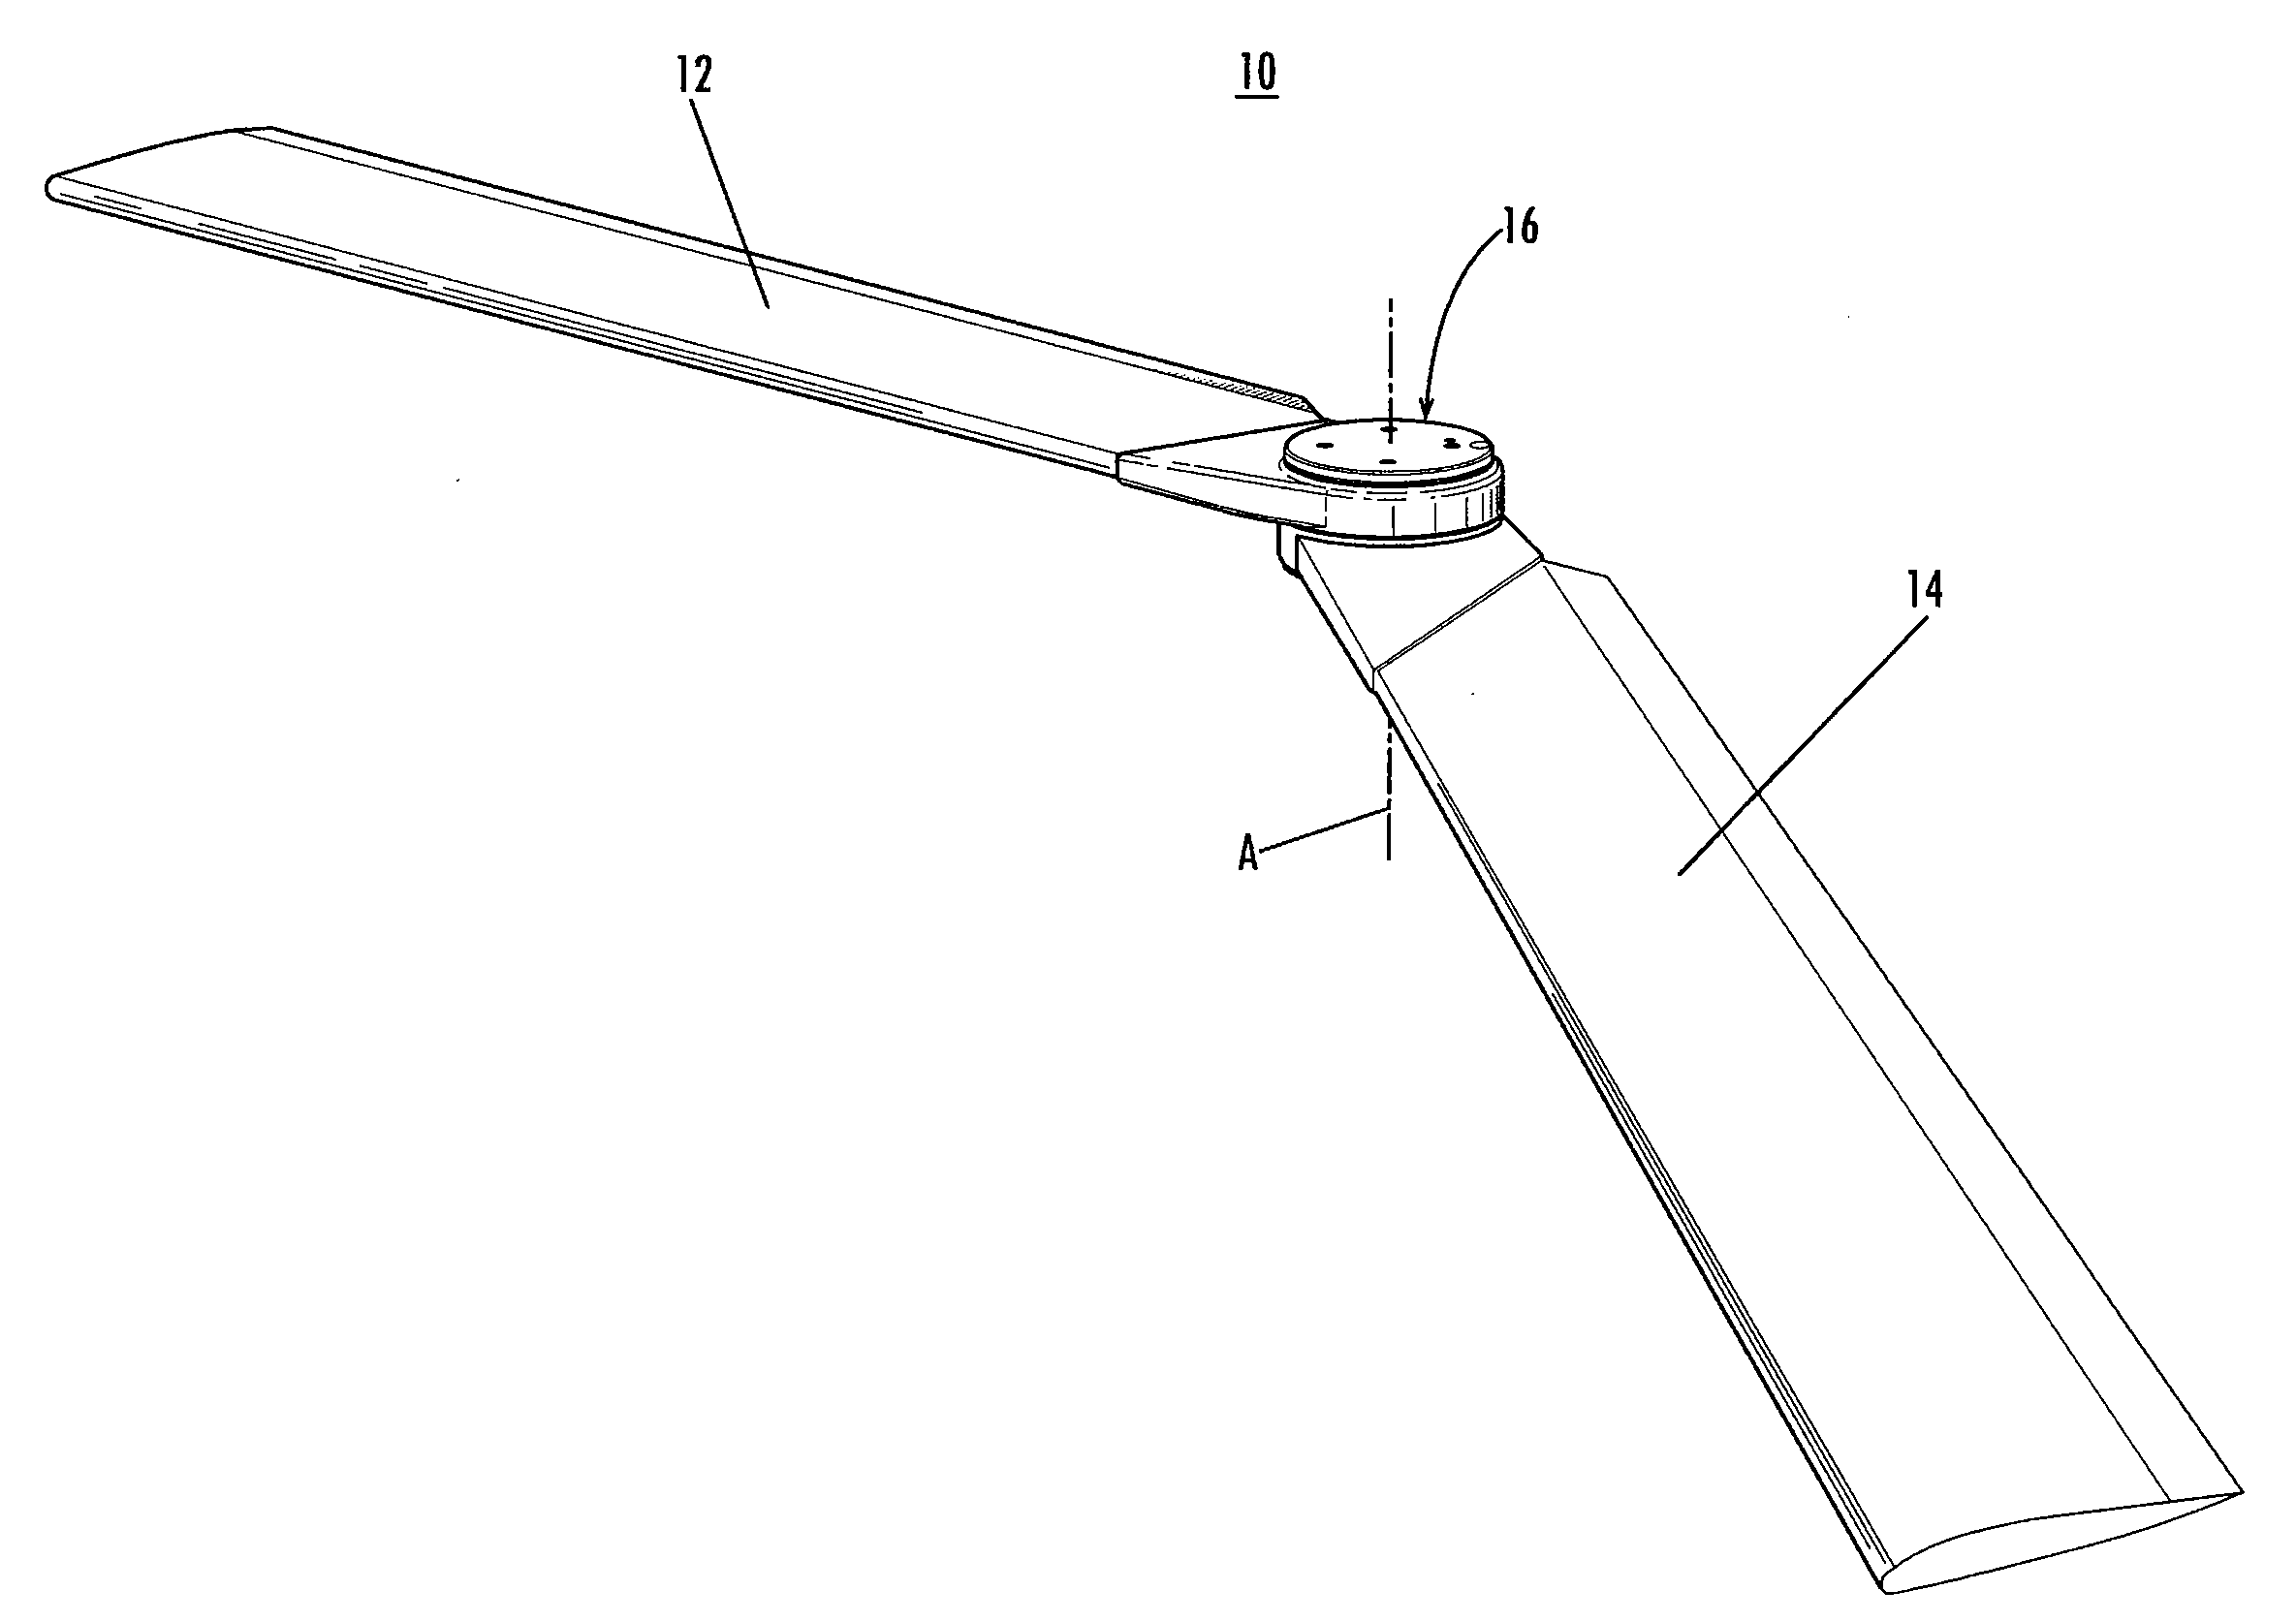 Mechanism for folding, sweeping, and locking vehicle wings about a single pivot